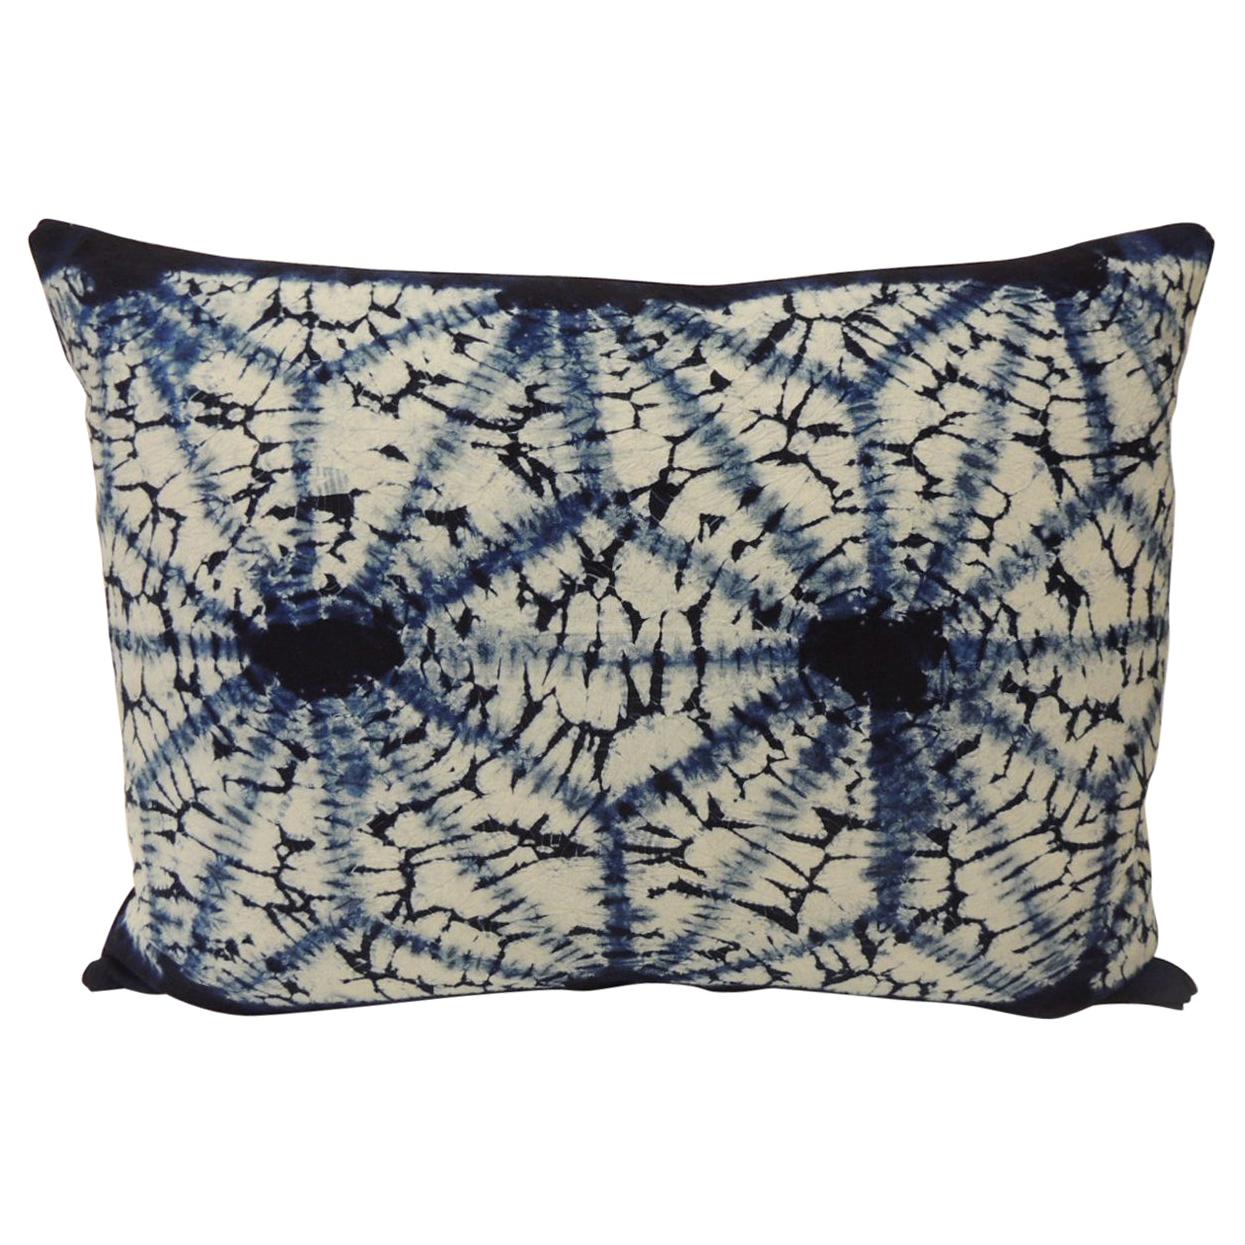 Vintage Indigo and White African "Shibori" Hand Dyed Textile Decorative Pillow For Sale